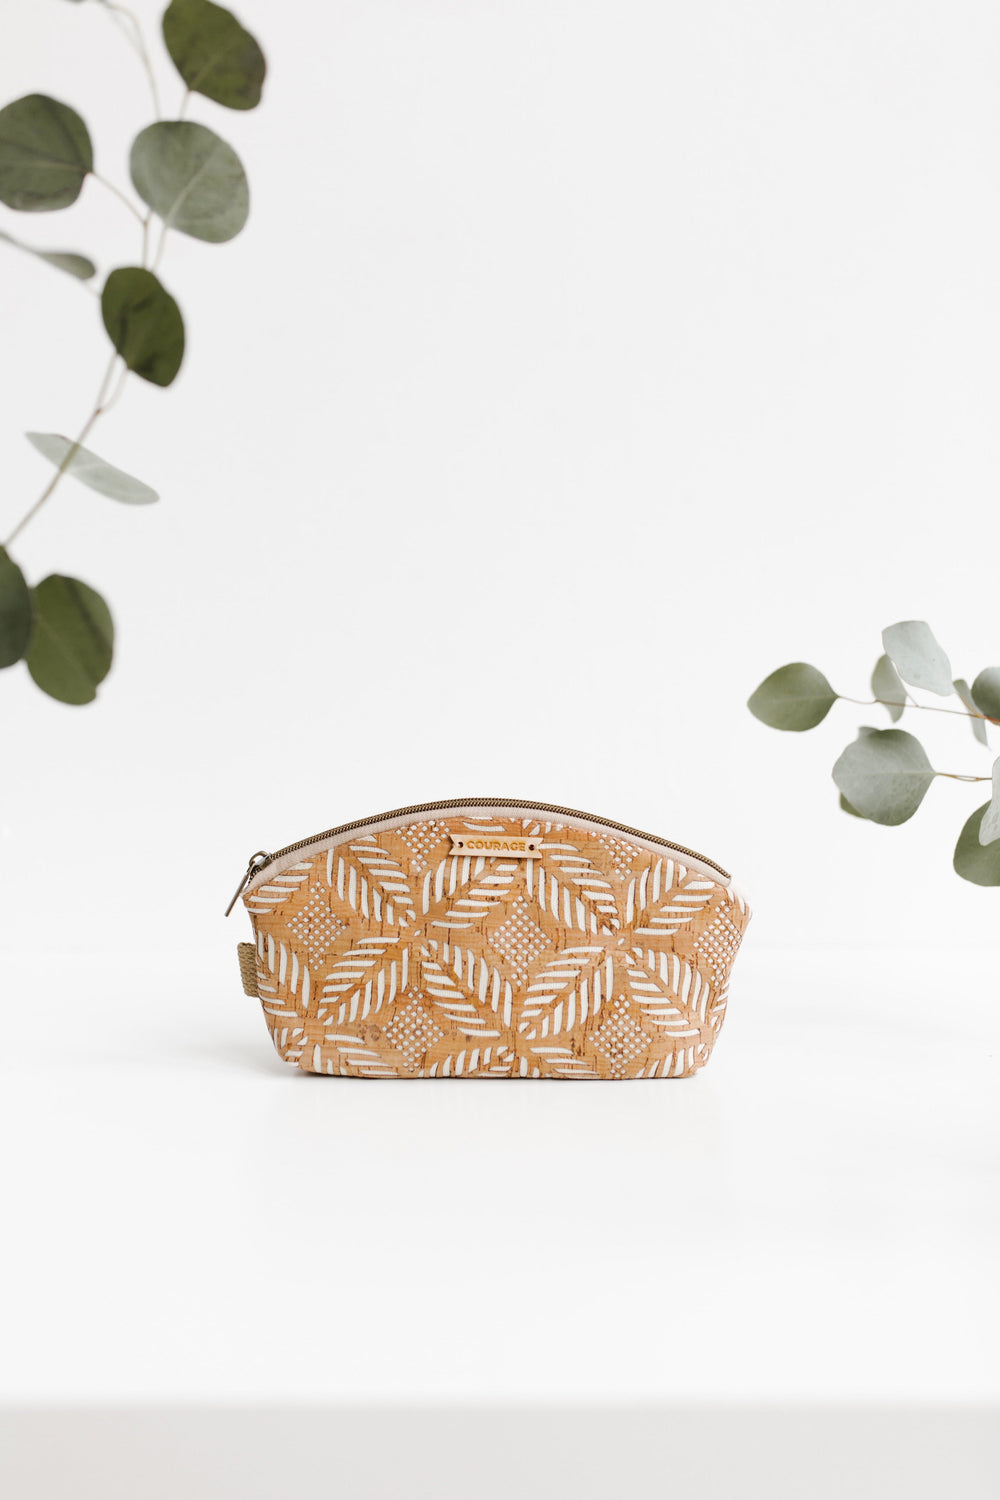 RULE BREAKER zippered pouch | CREAM by Carry Courage